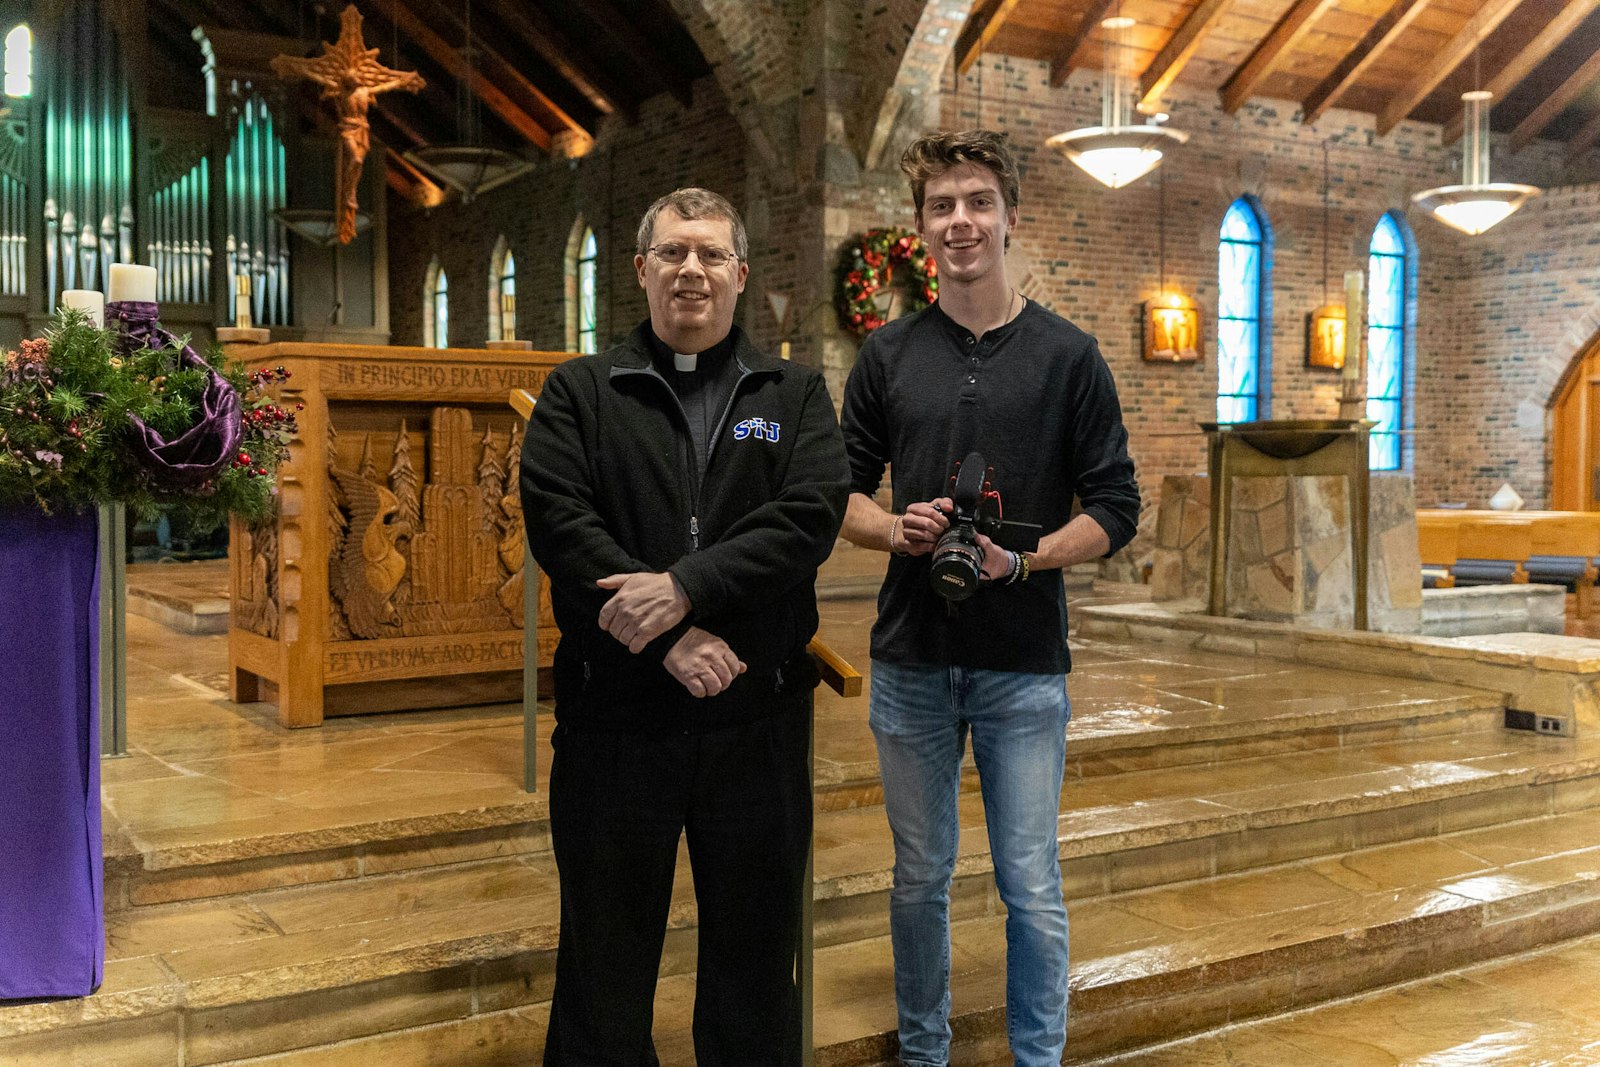 When Fr. Kean agreed to be interviewed for the film, he was surprised by Sasak's "professionalism and focus," and said the final product is reflective of the hard work and dedication the teen put into the project.